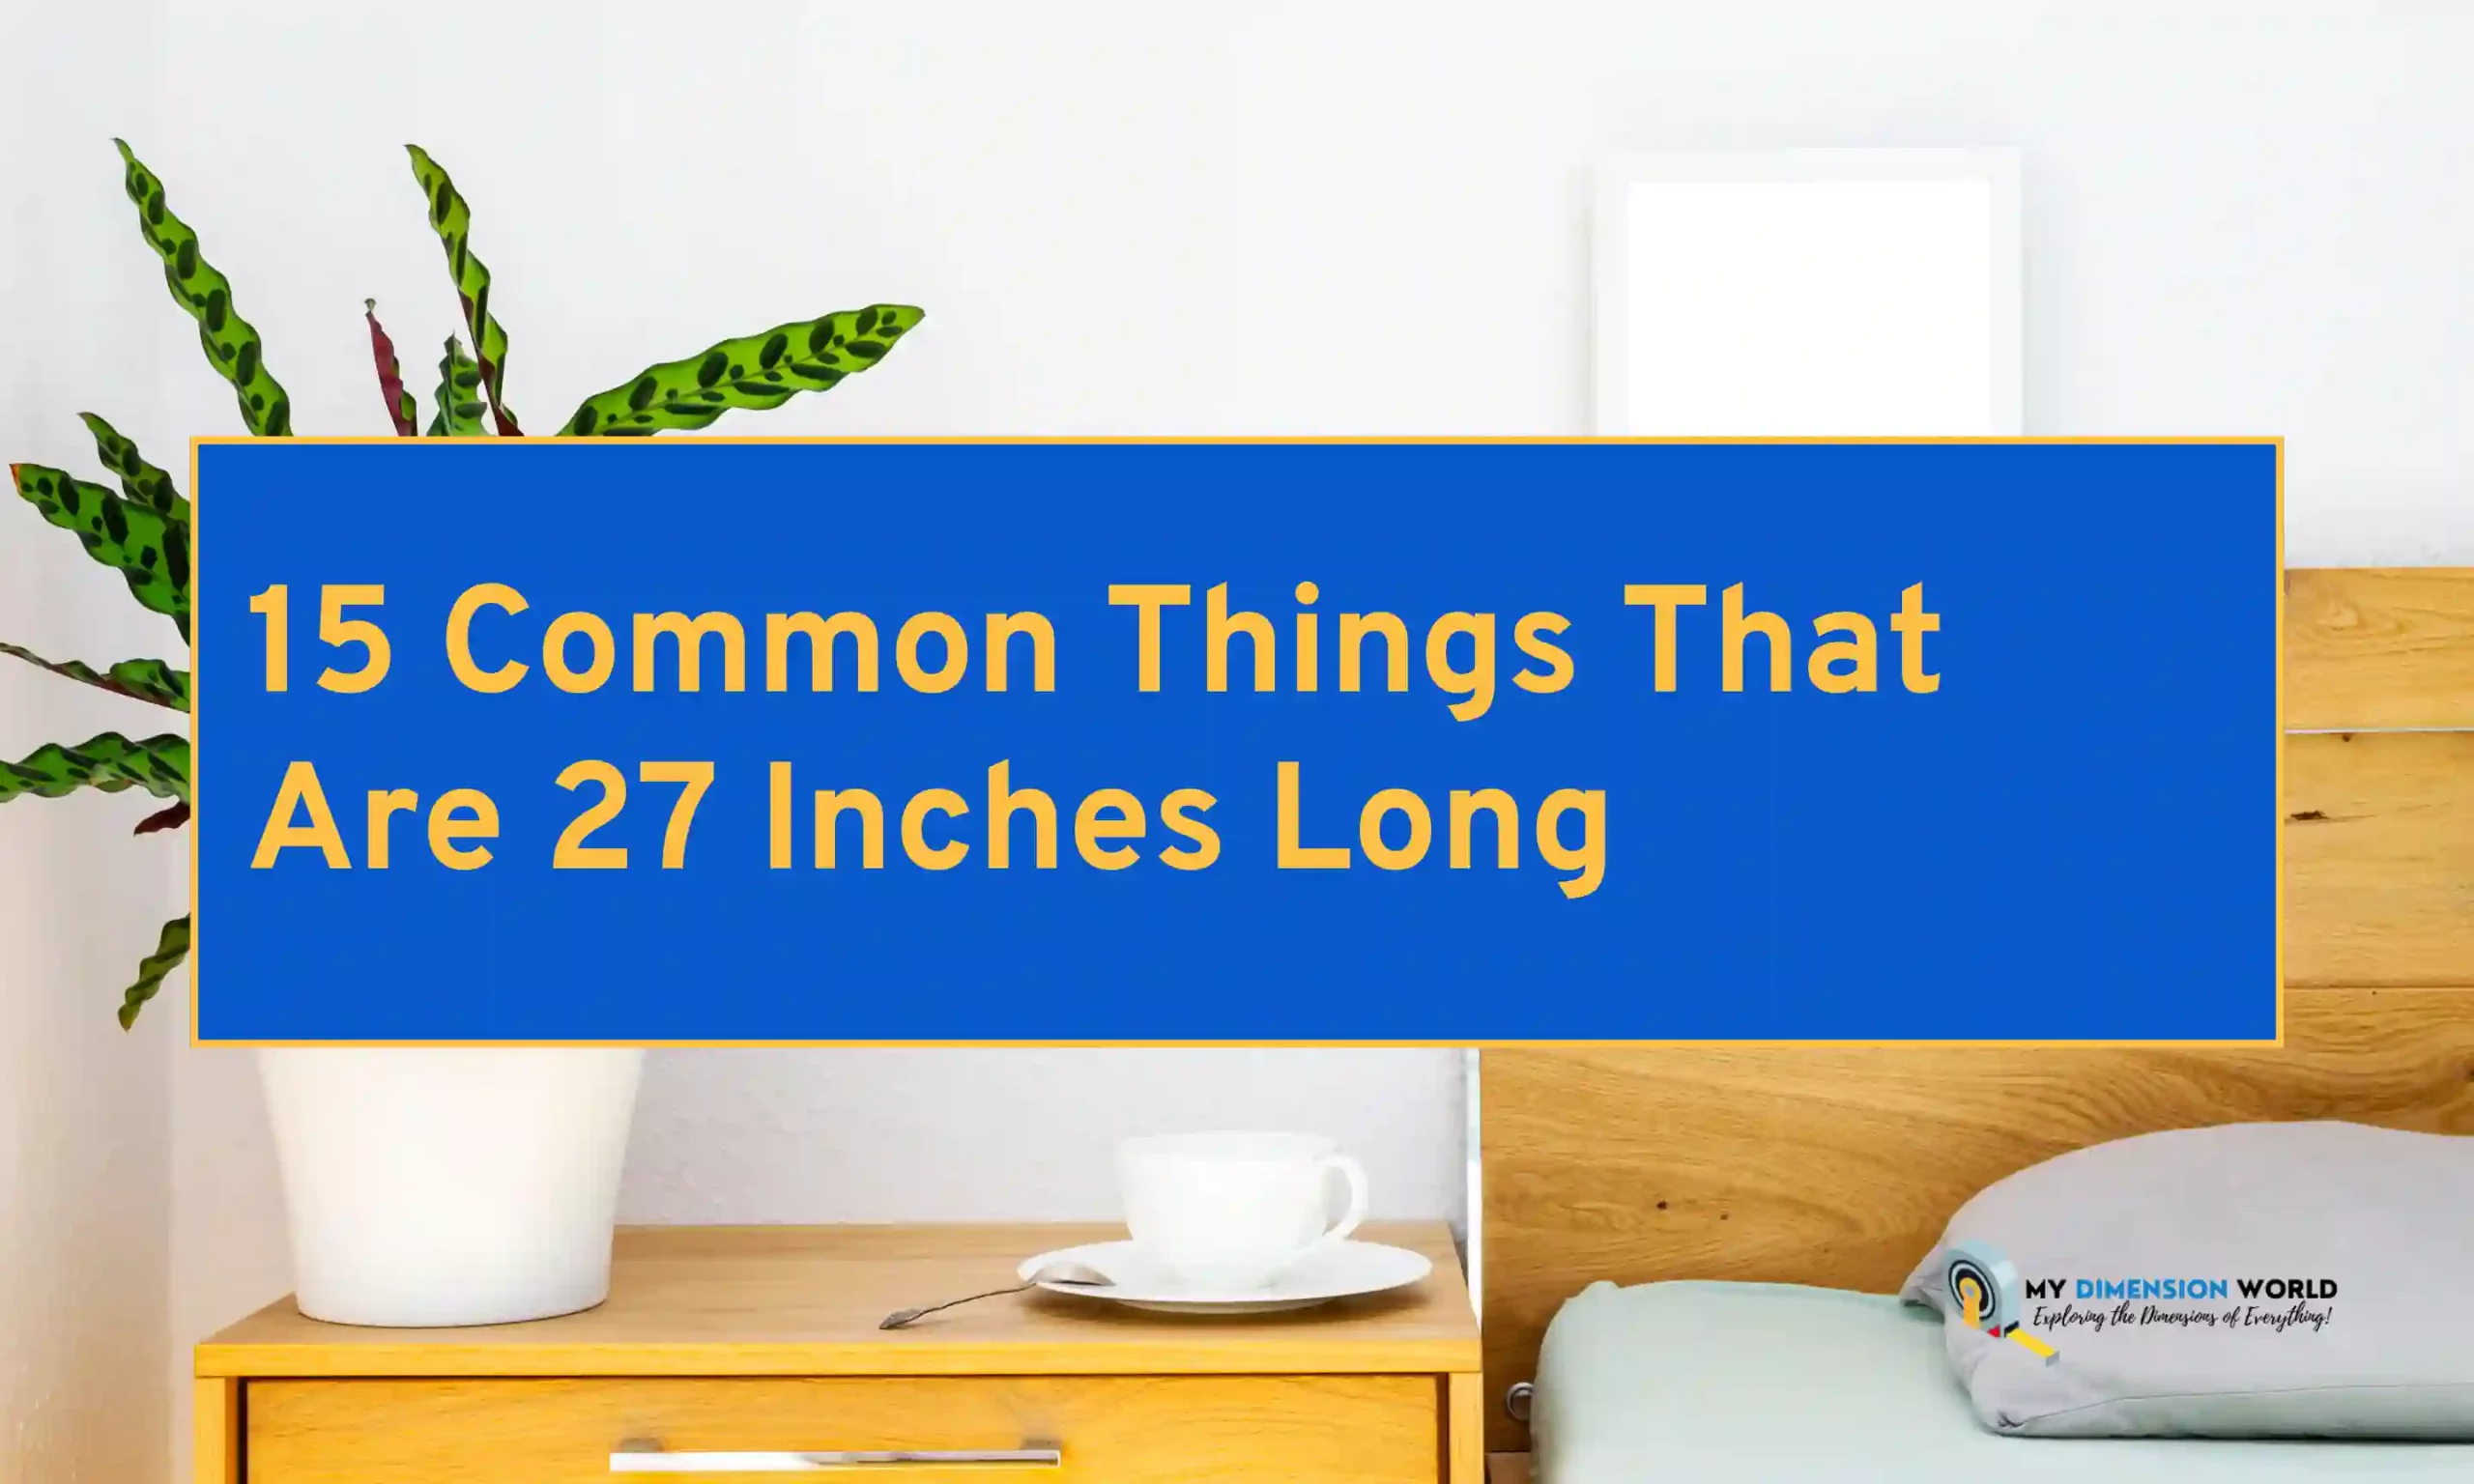 15 Common Things That Are 27 Inches Long